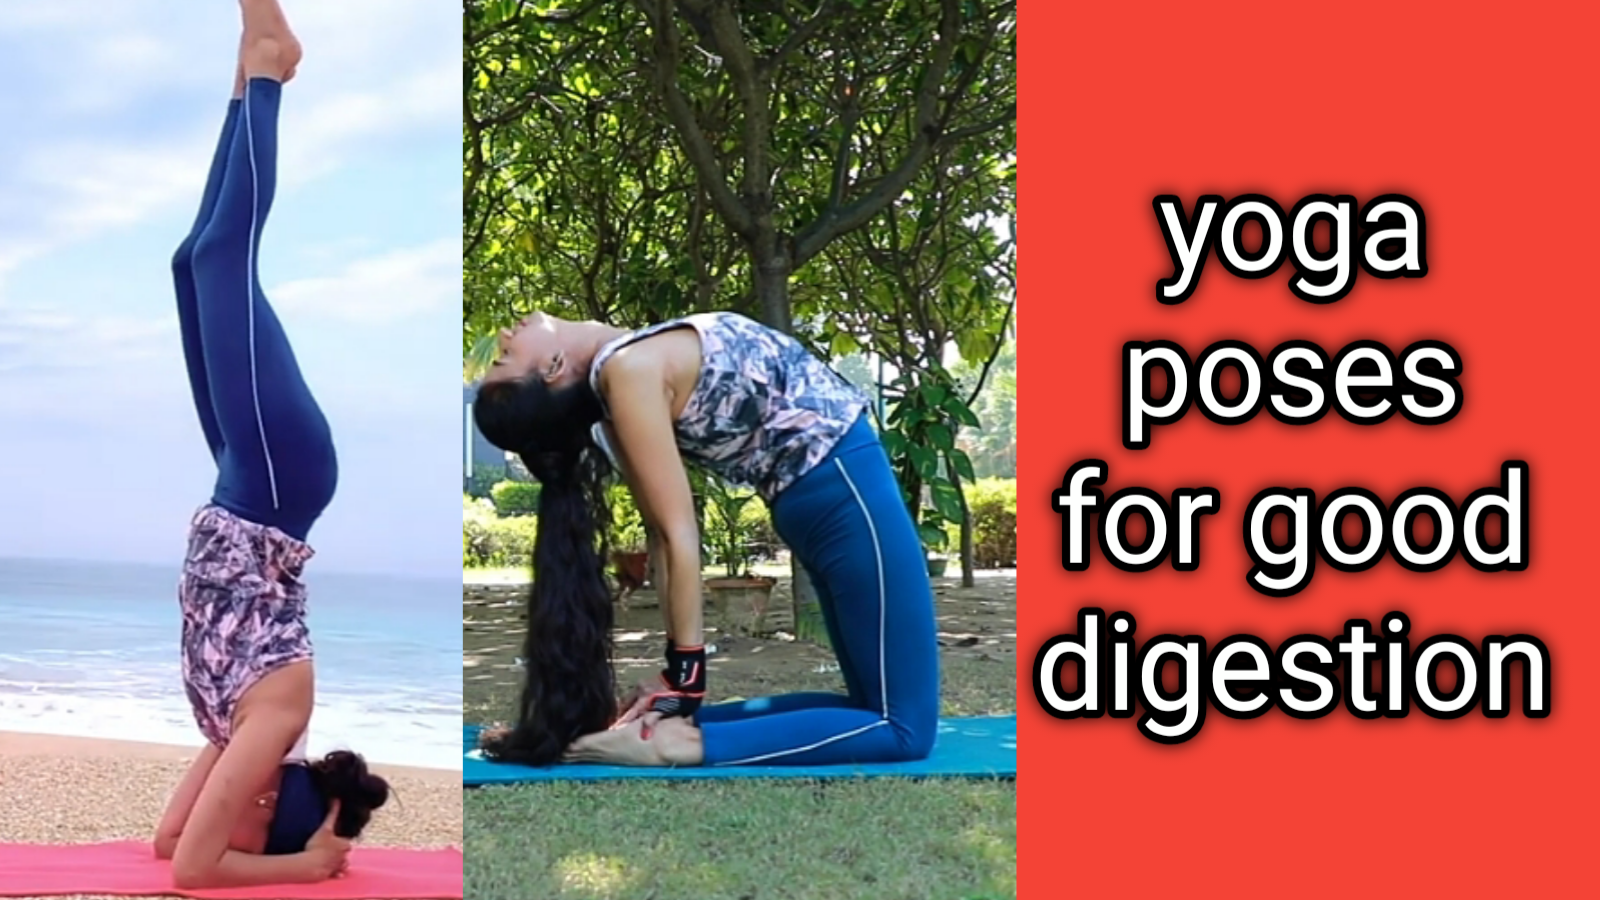 5 Easy Yoga Exercises & Poses to Help Ease the Digestion Process